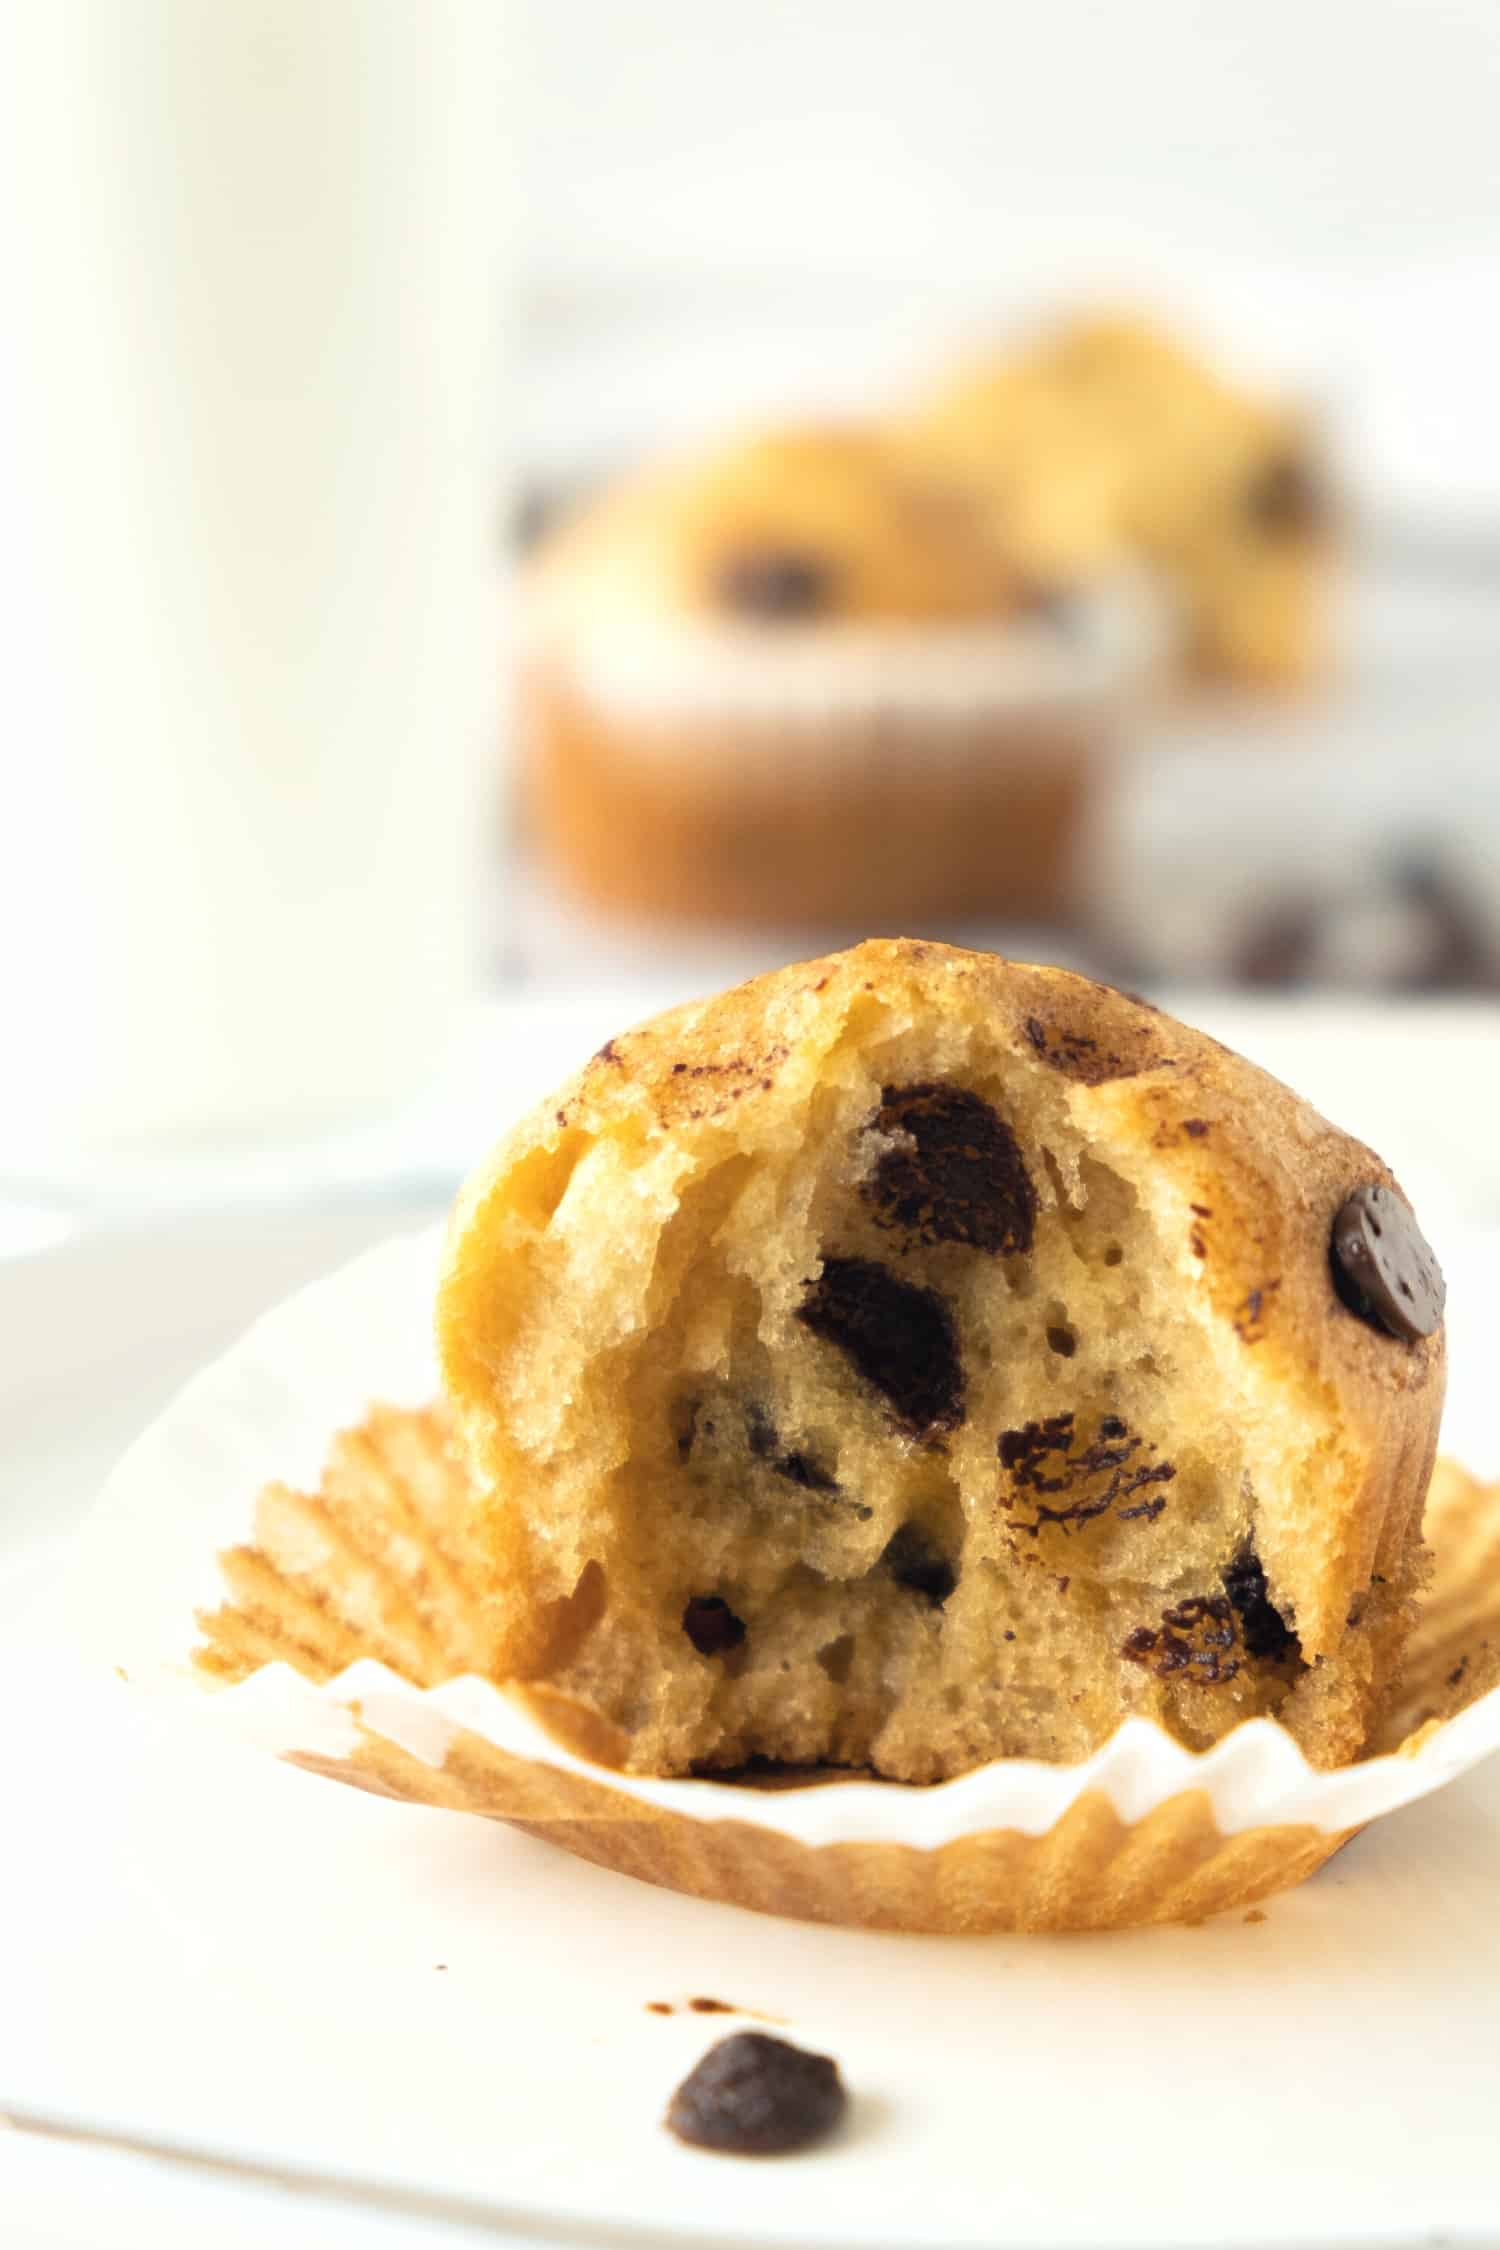 Up close shot of texture of half-eaten chocolate chip muffin.